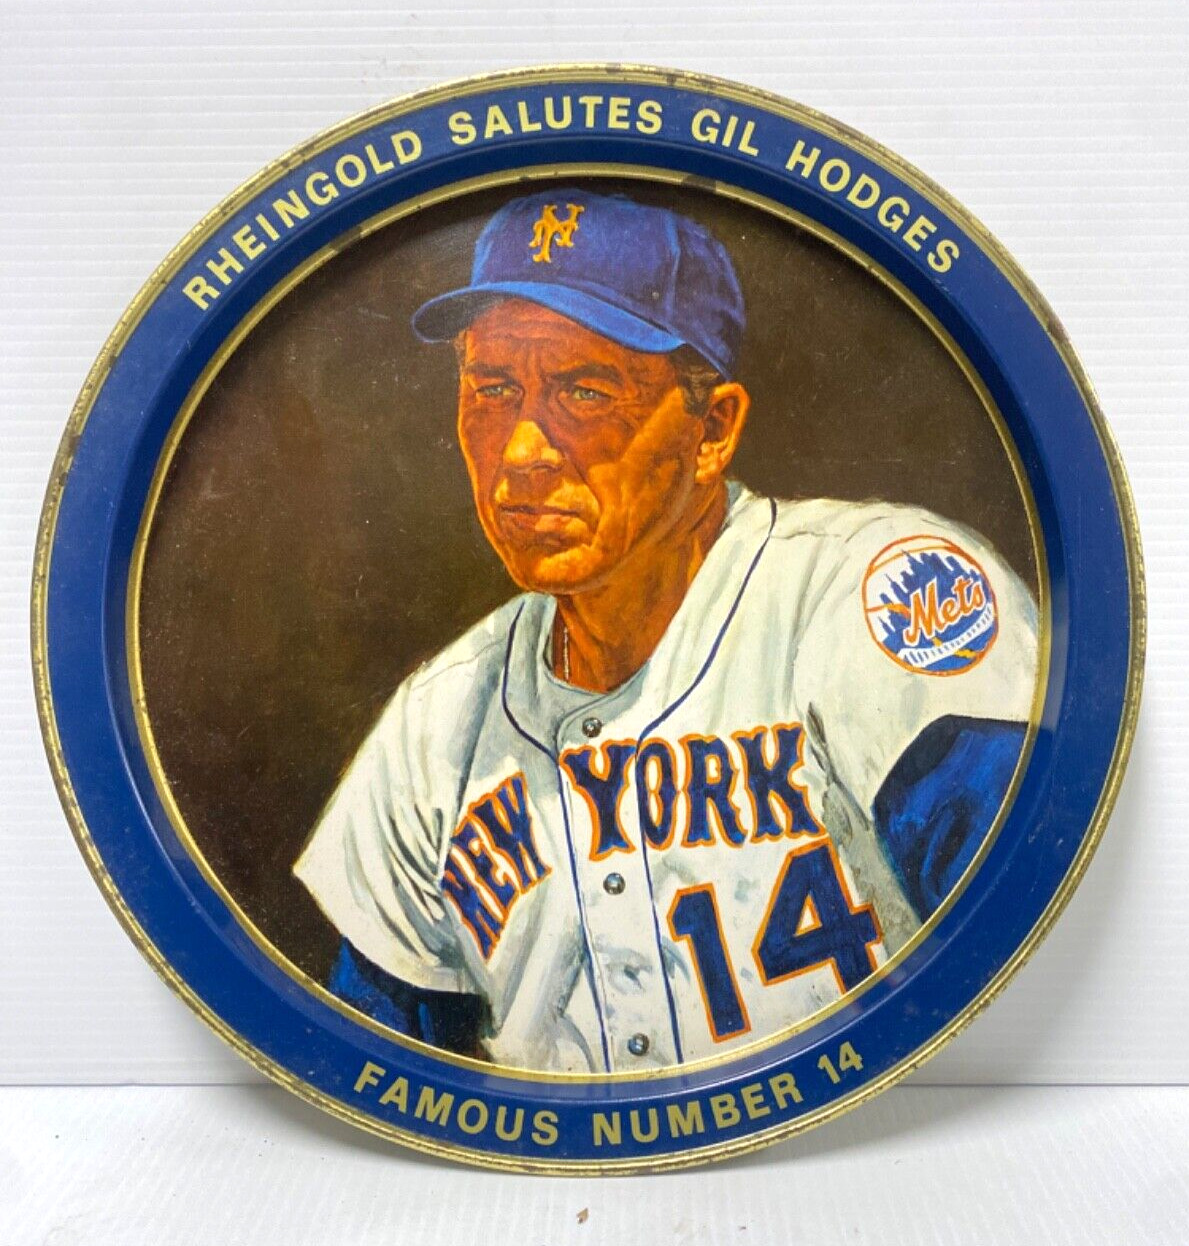 Very Rare ---Rheingold Salutes Gil Hodges Famous #14 Vintage  Beer Tray NY Mets